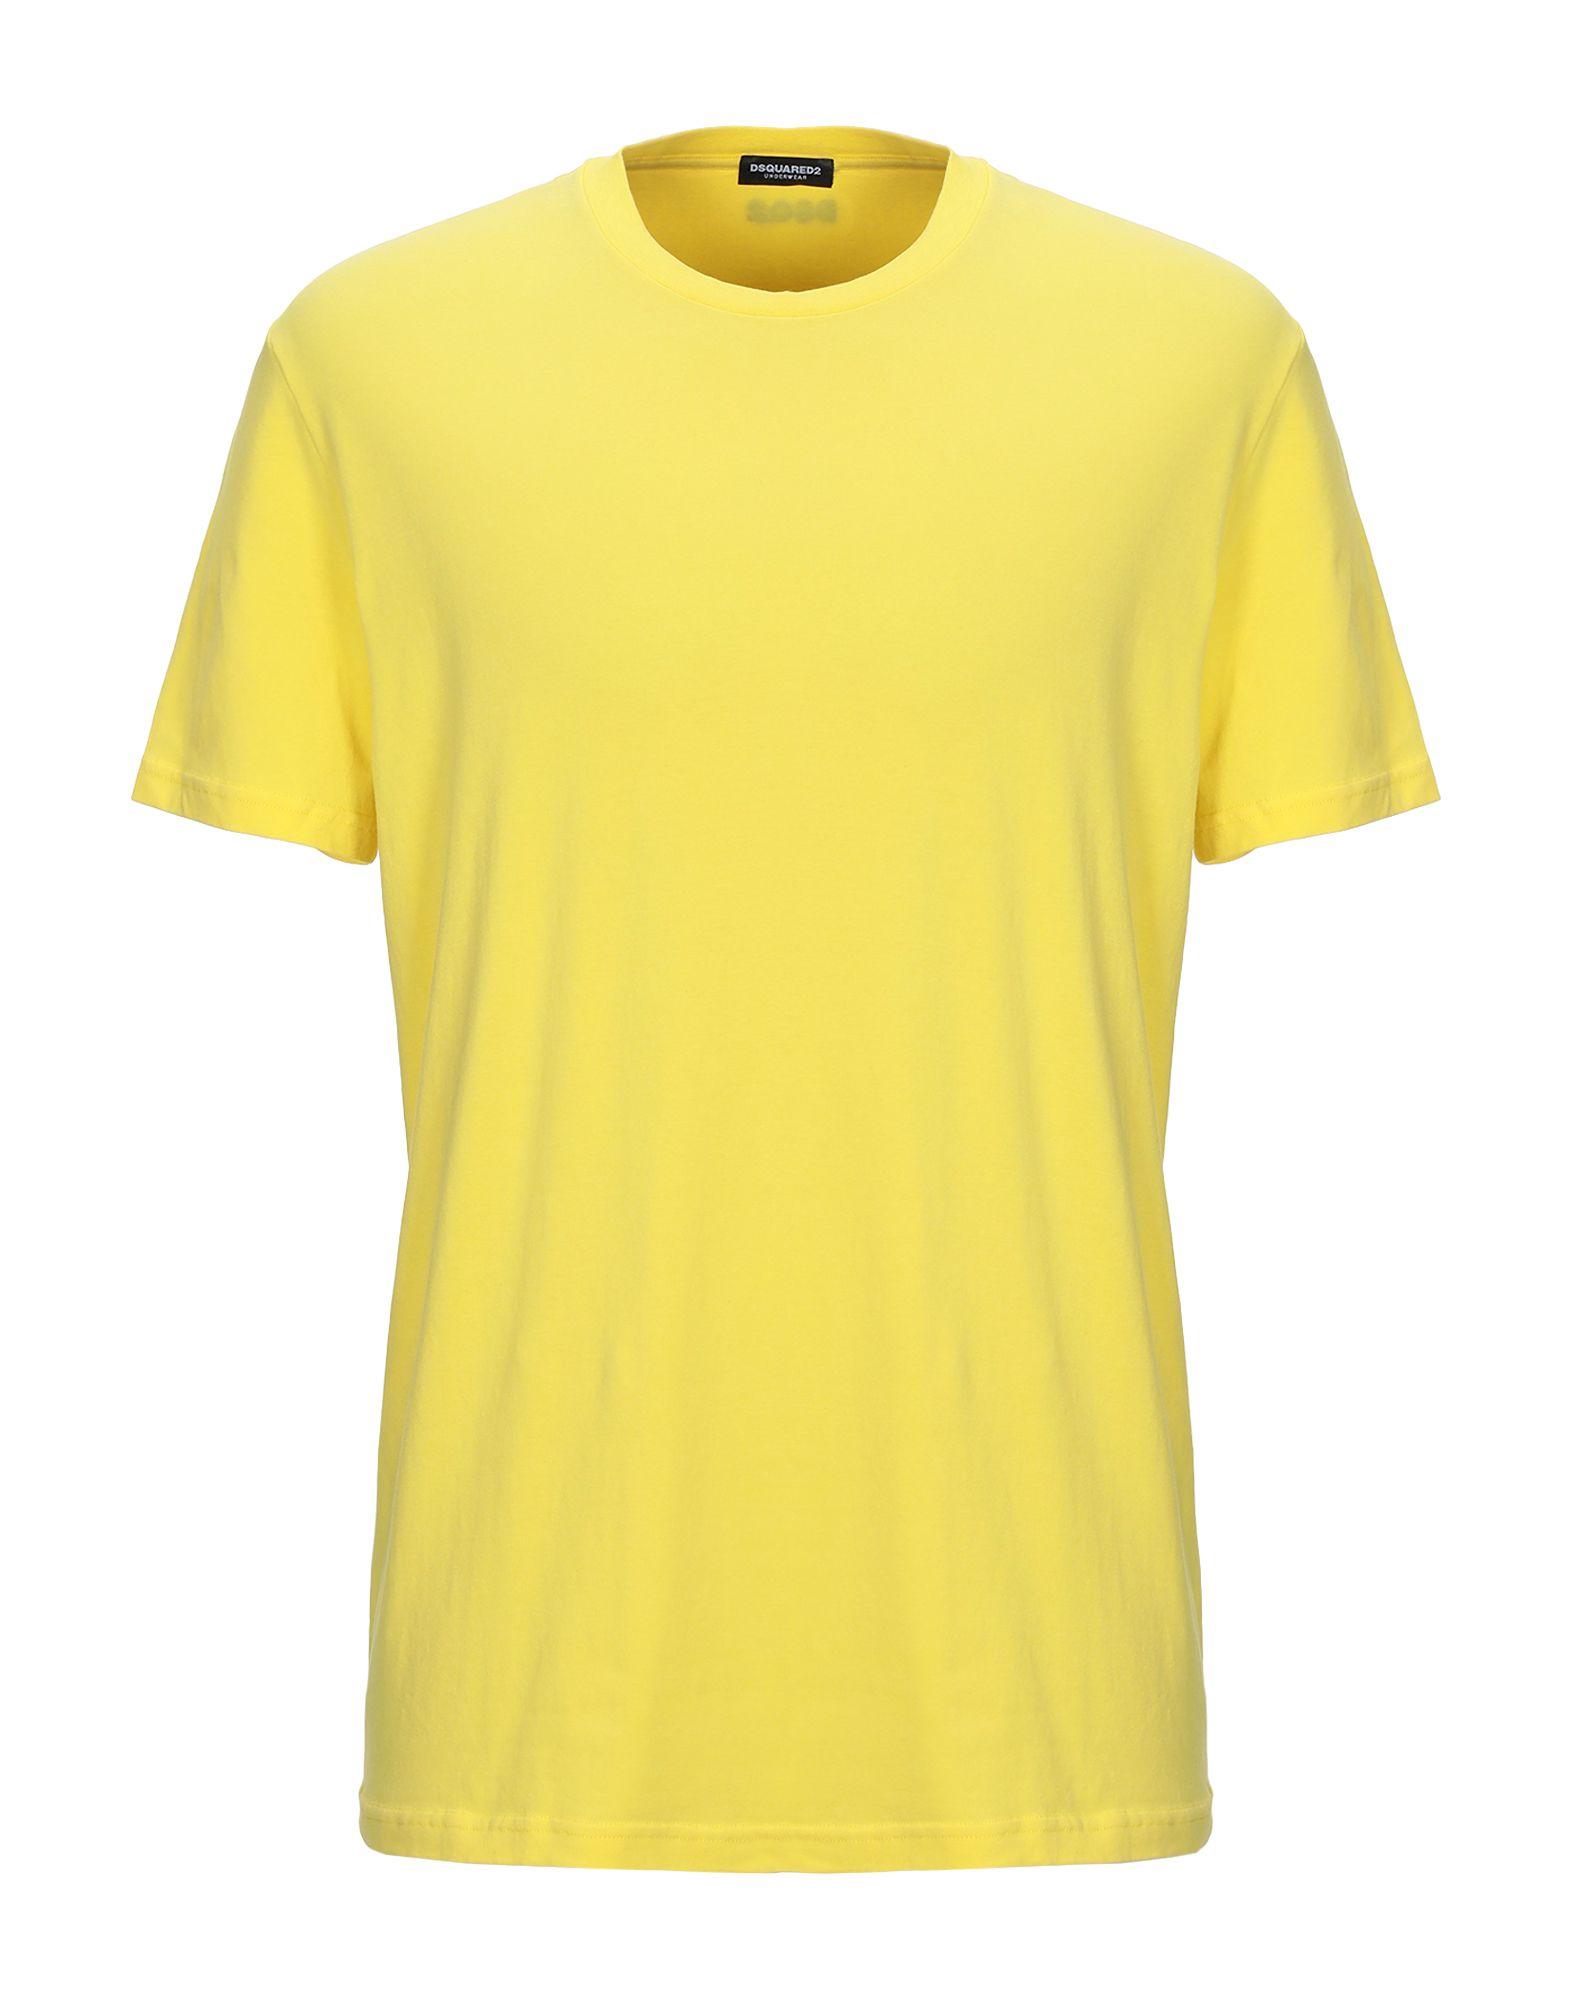 DSquared² Undershirt in Yellow for Men - Lyst